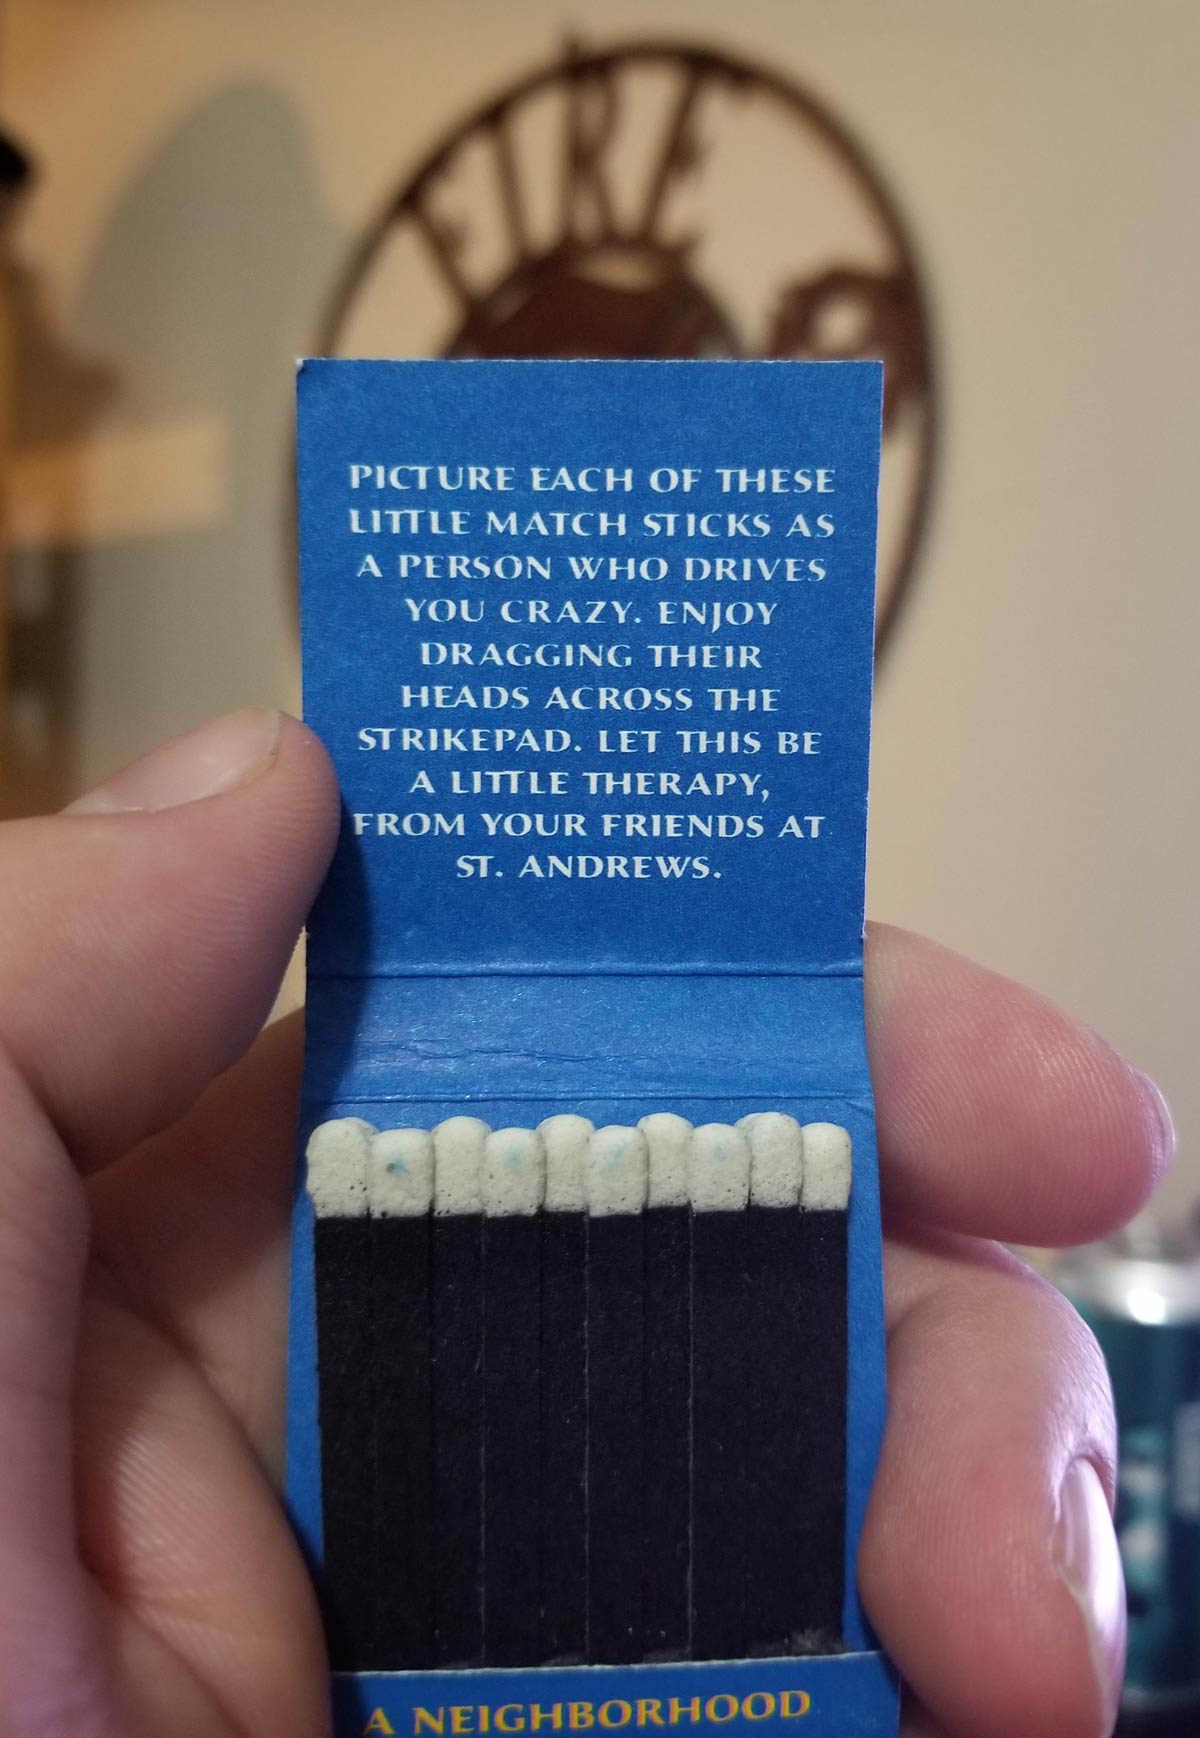 This matchbook